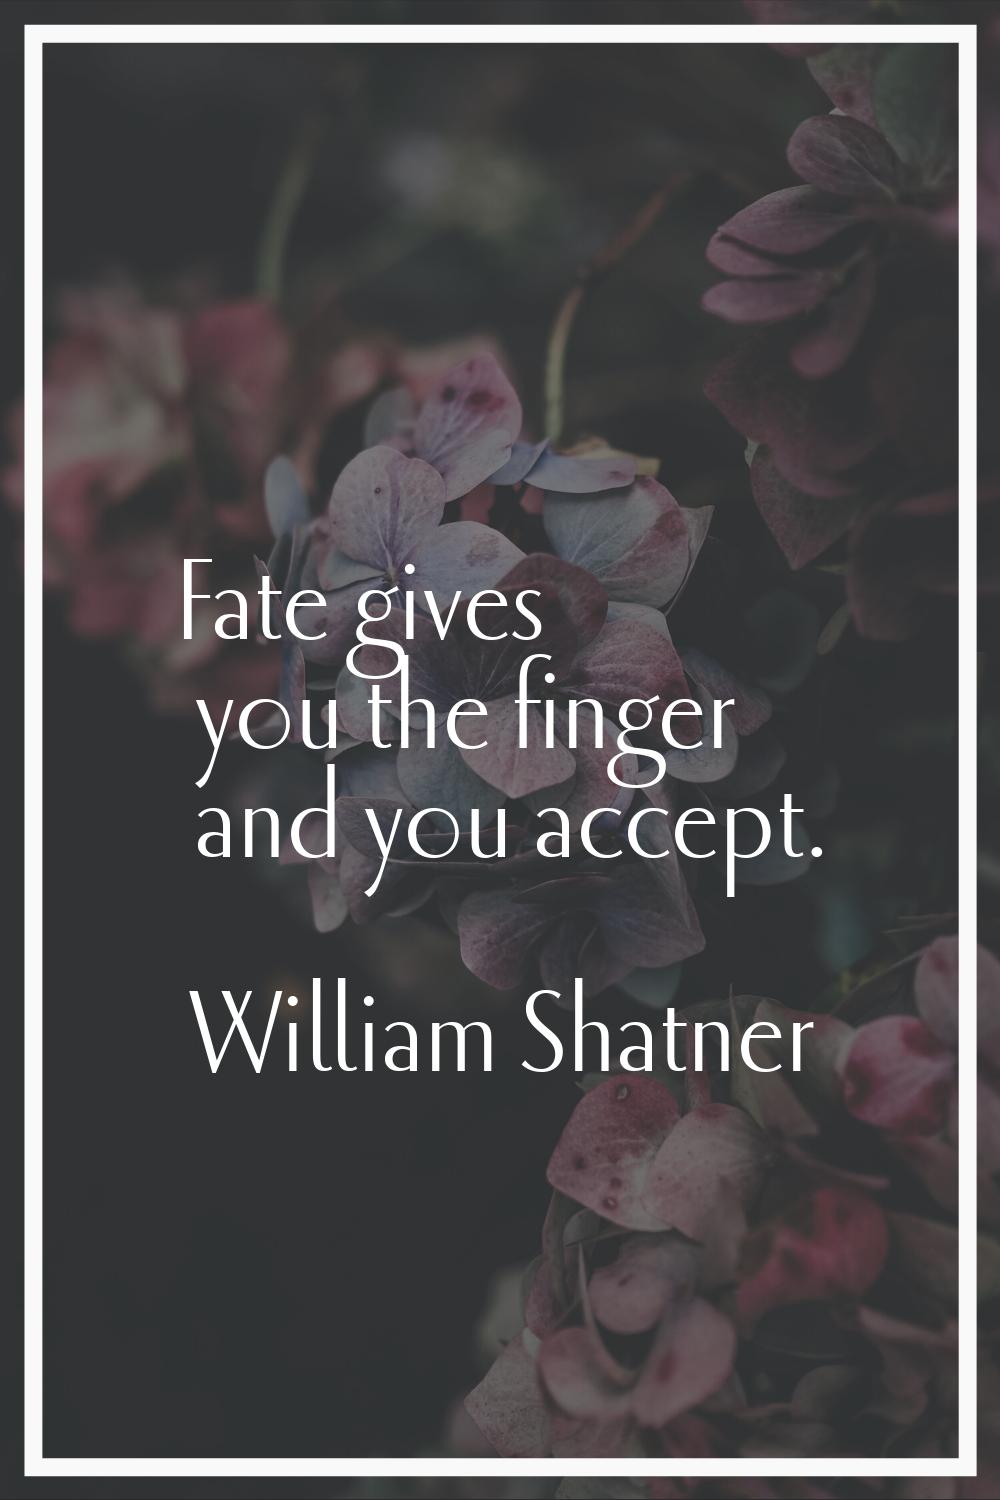 Fate gives you the finger and you accept.